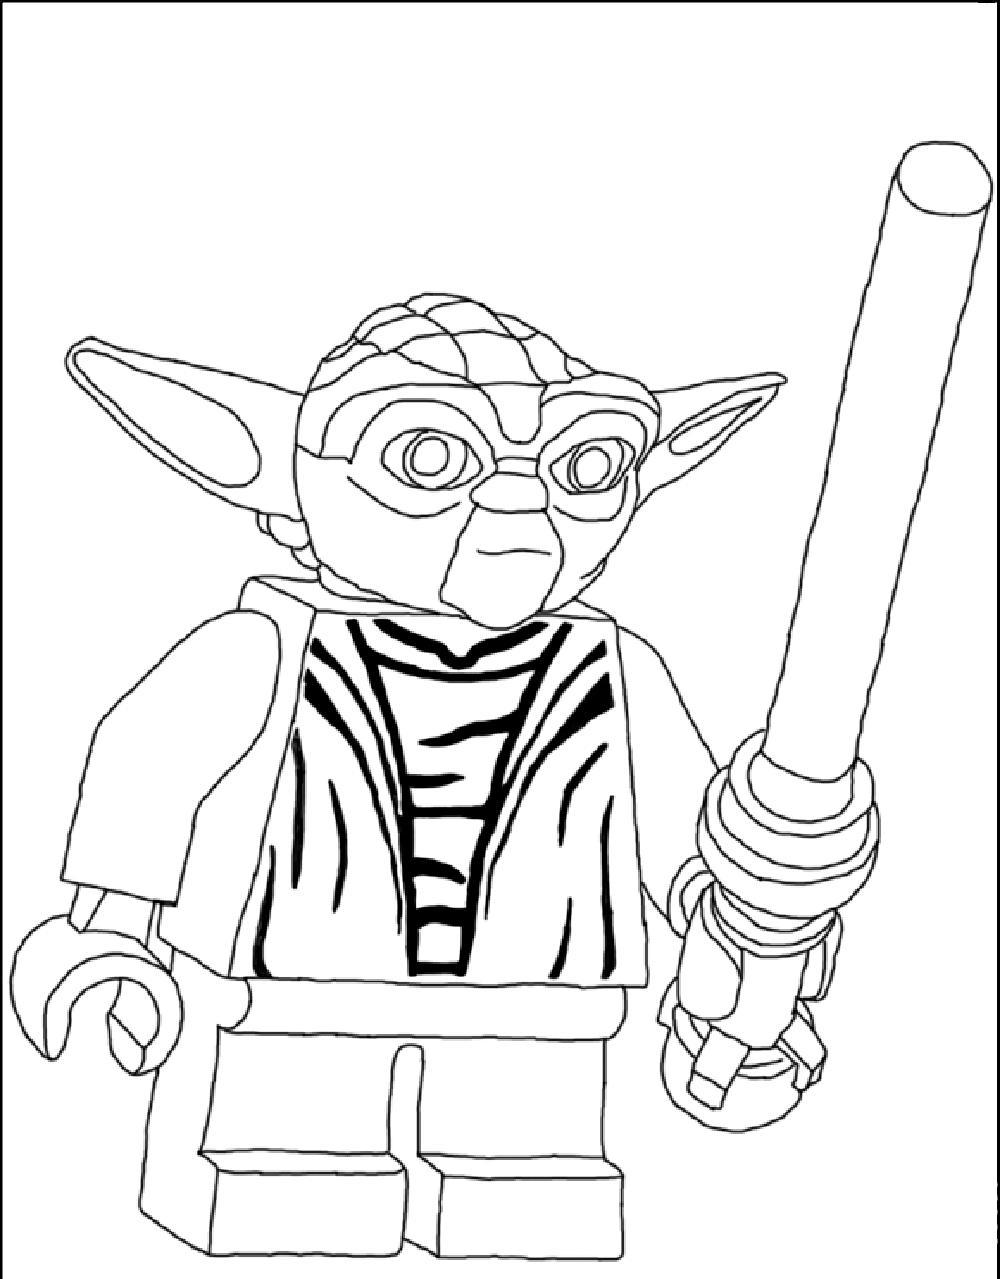 make coloring pages out of pictures - photo #38